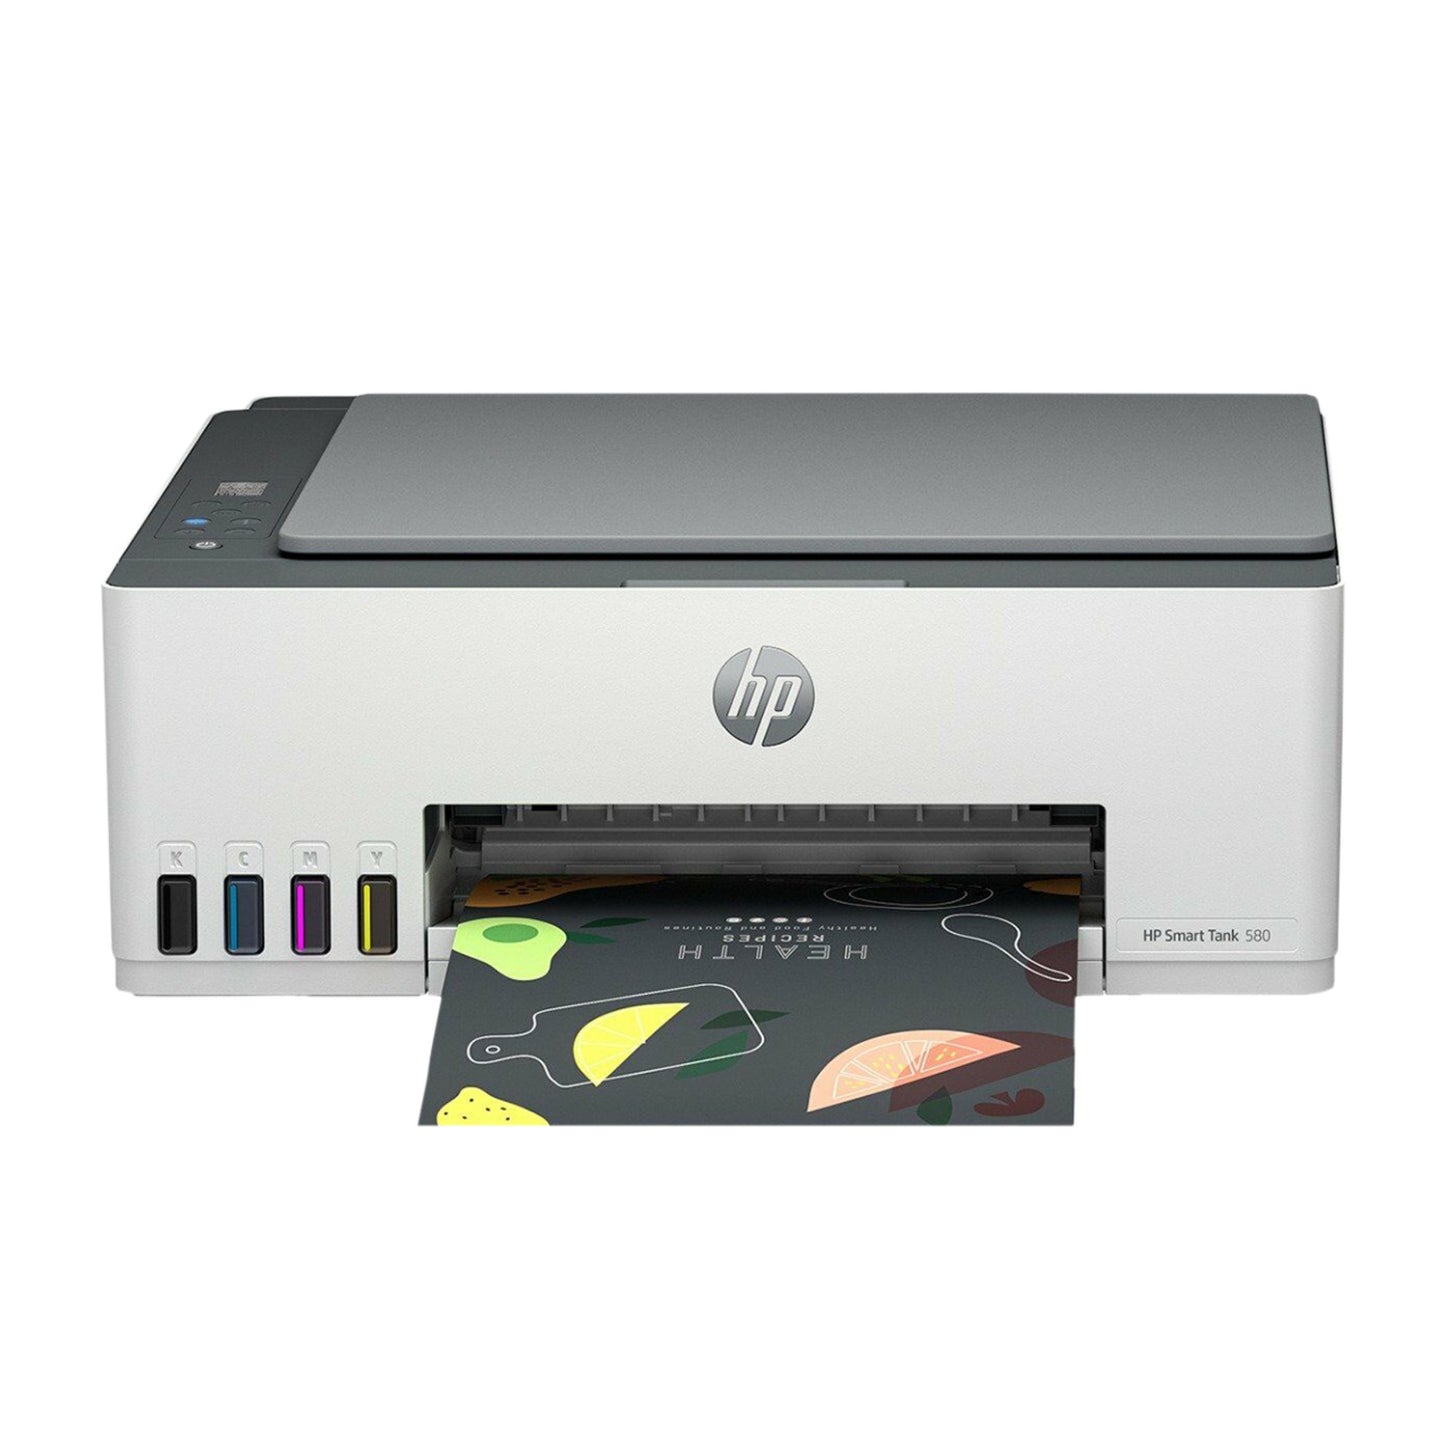 HP Smart Tank 580 All-In-One Printer